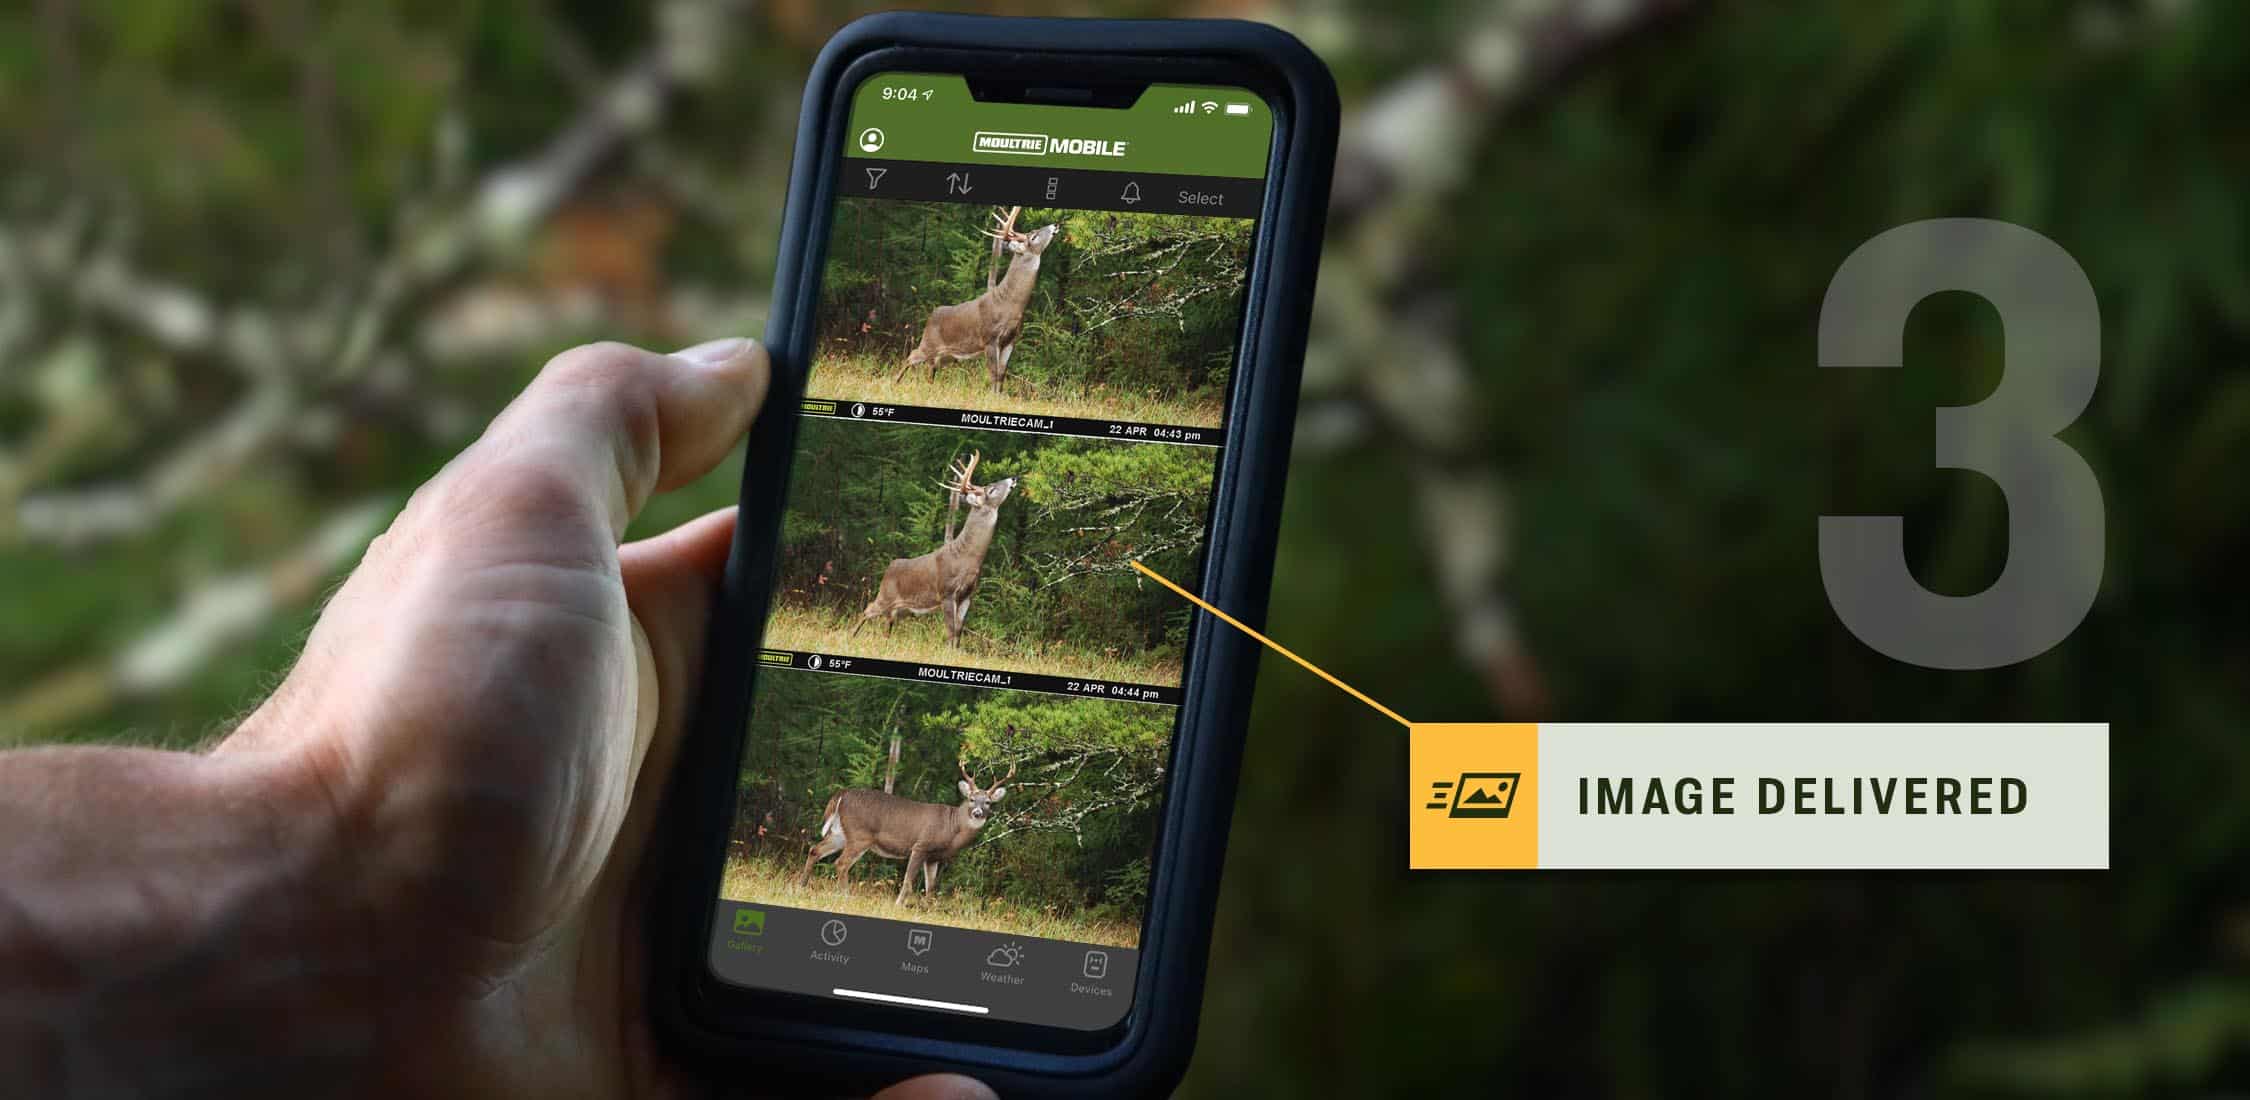 Moultrie Mobile App image delivery